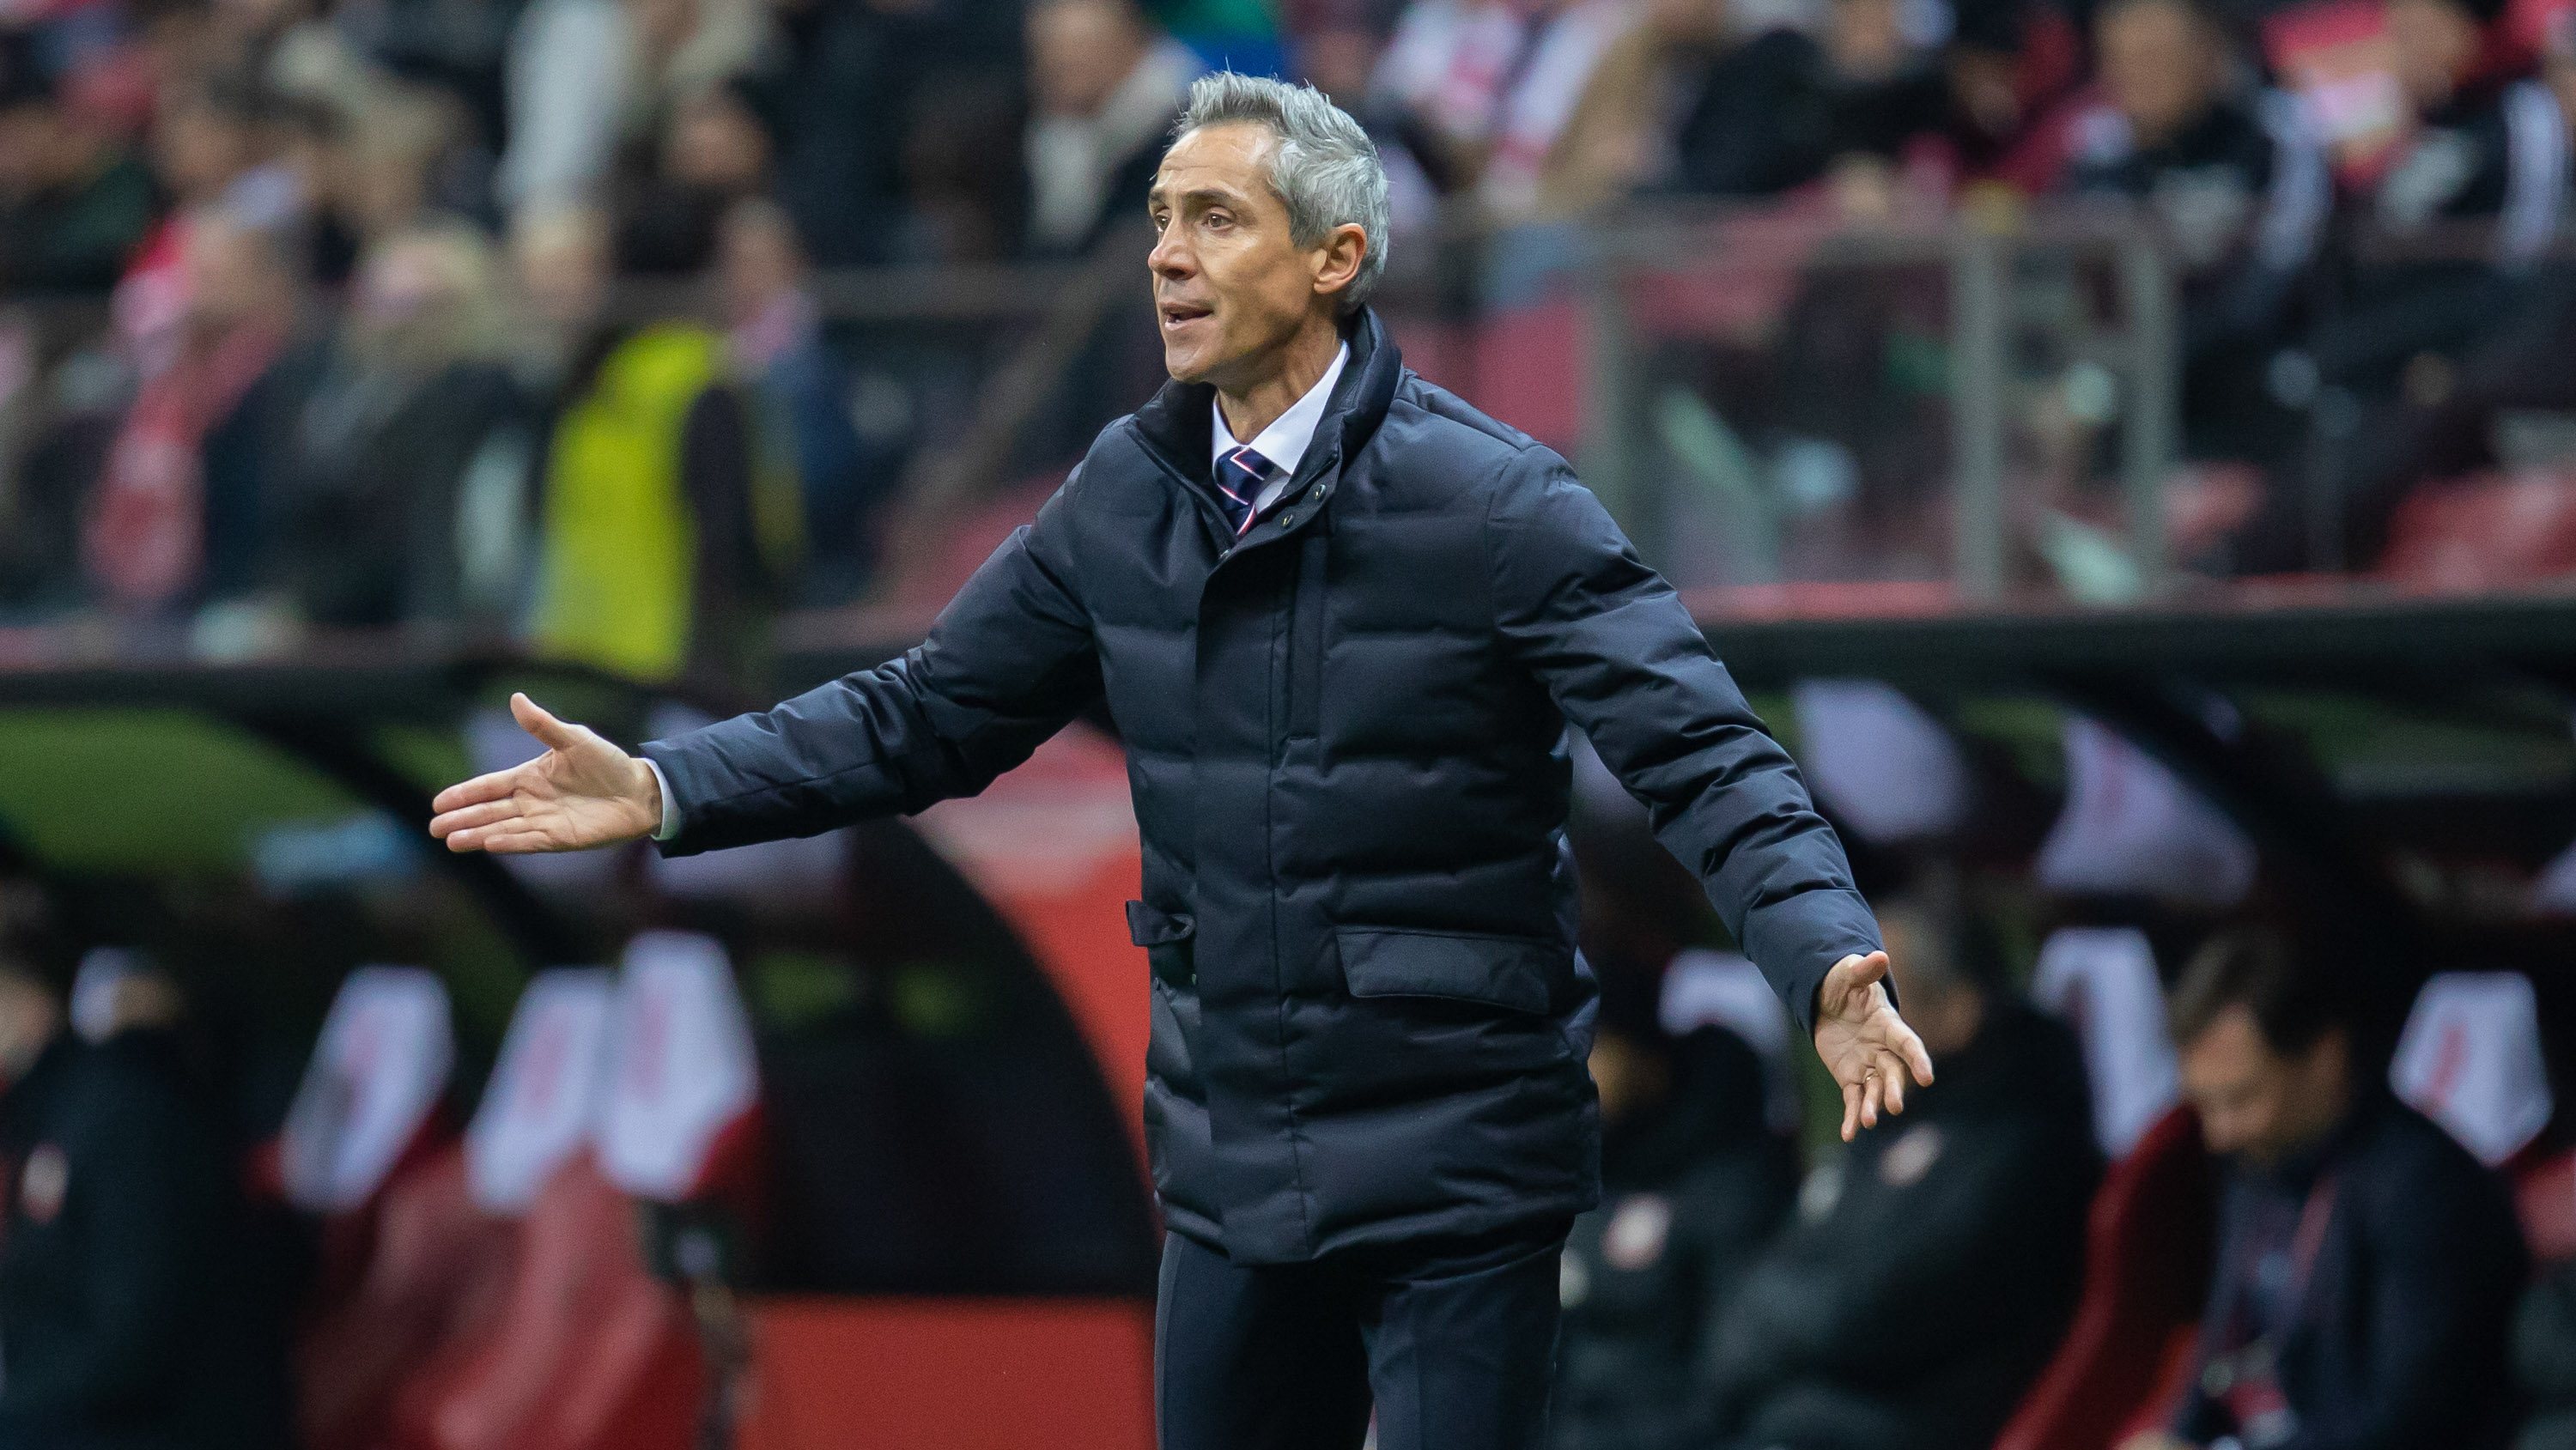 Paulo Sousa coach of Poland seen in action during the FIFA